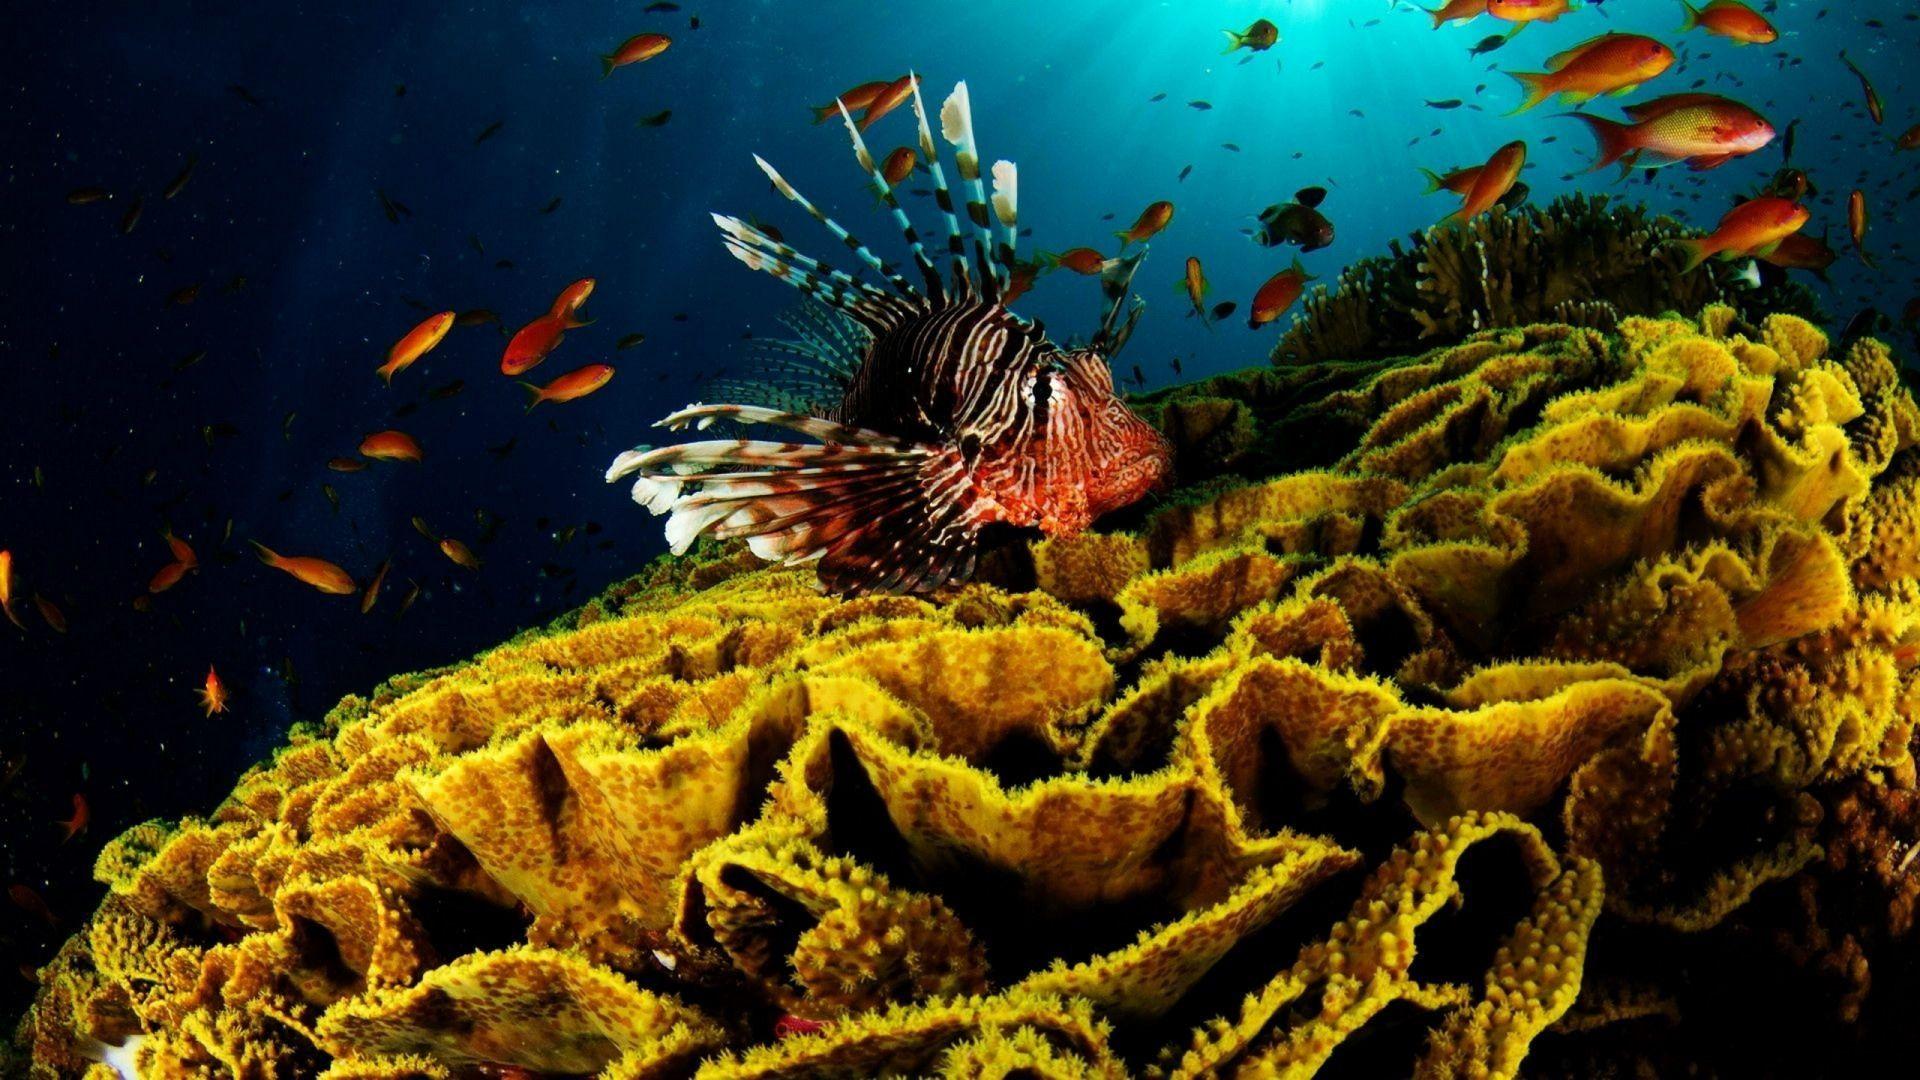 Coral Reef Wallpaper 25134 1920x1080 px